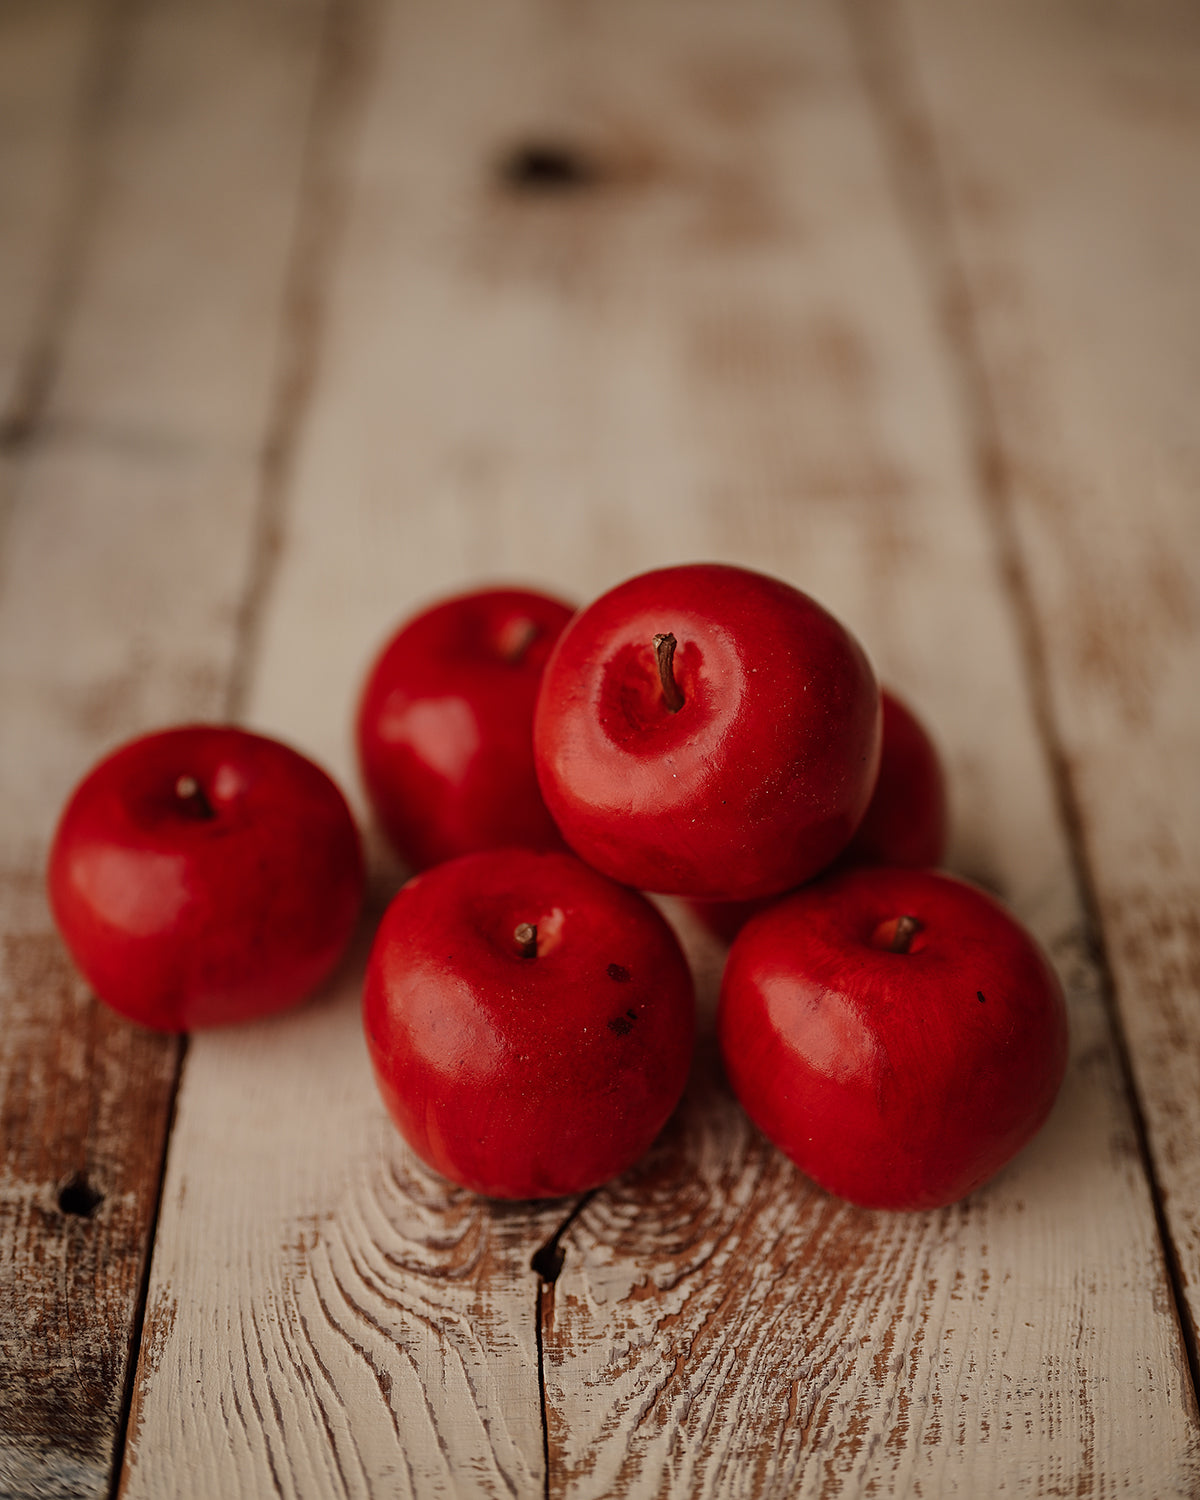 Super realistic red apples in life size